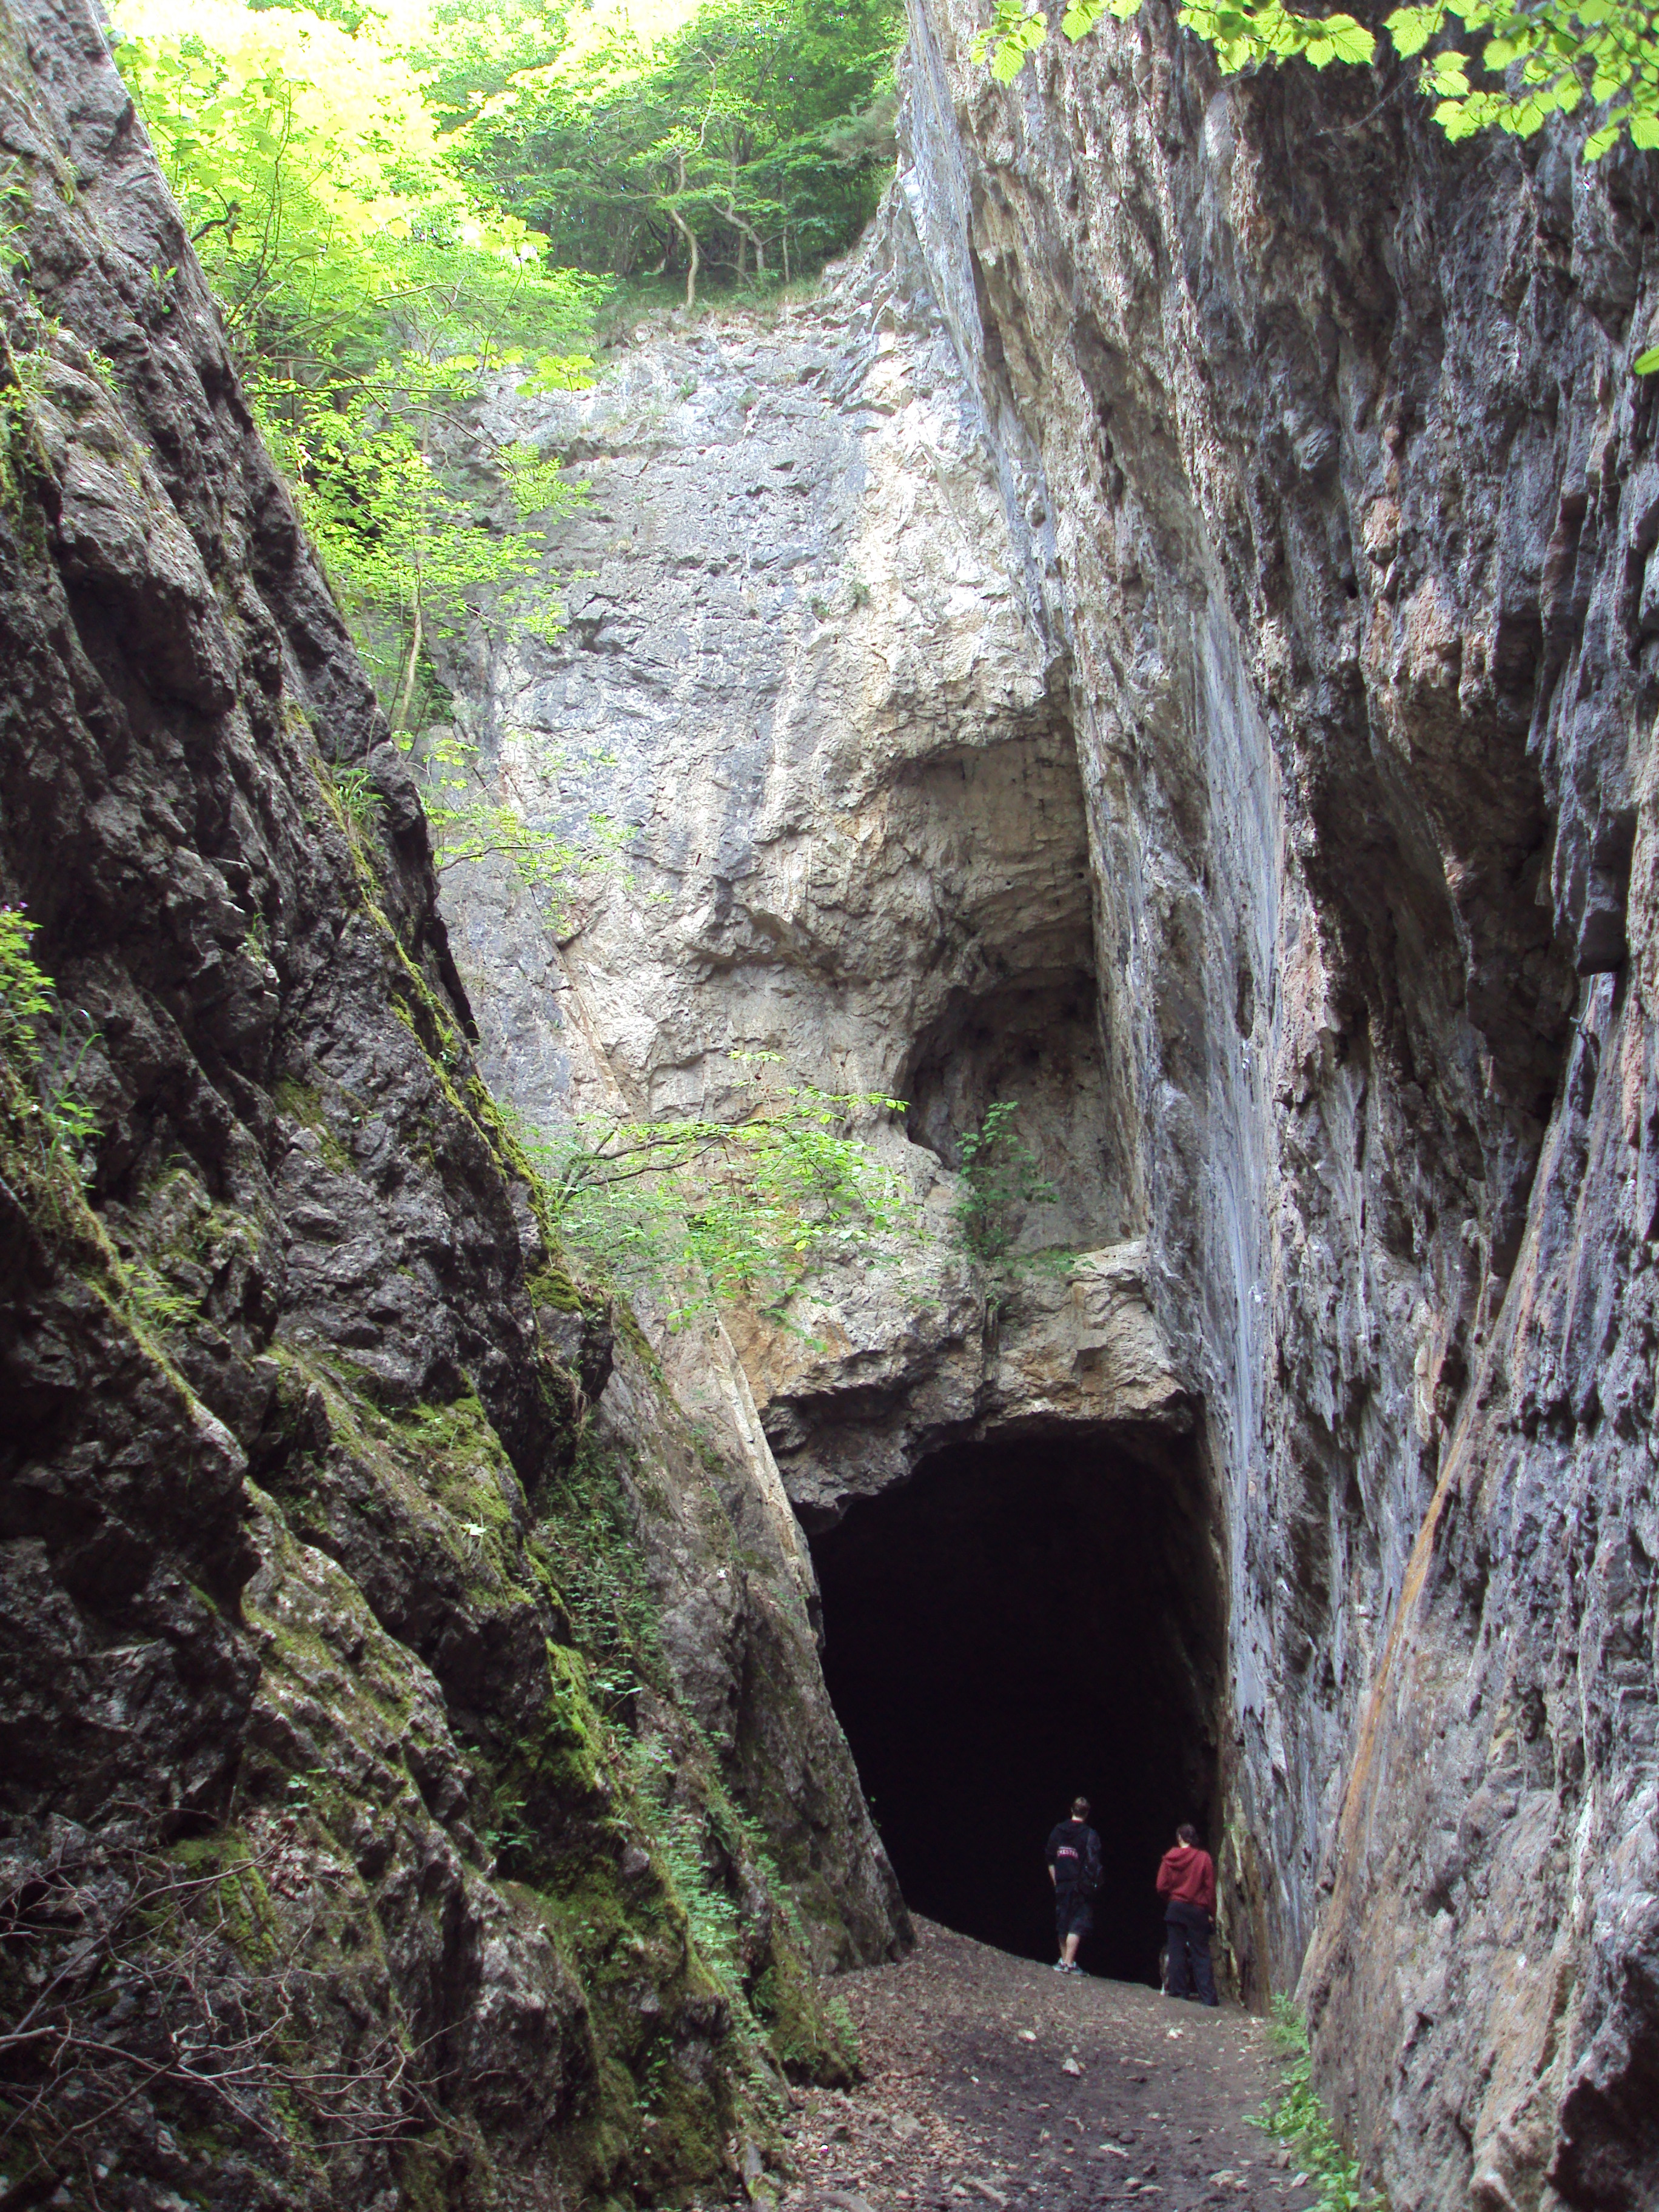 Alyn Valley Woods and Alyn Gorge Caves